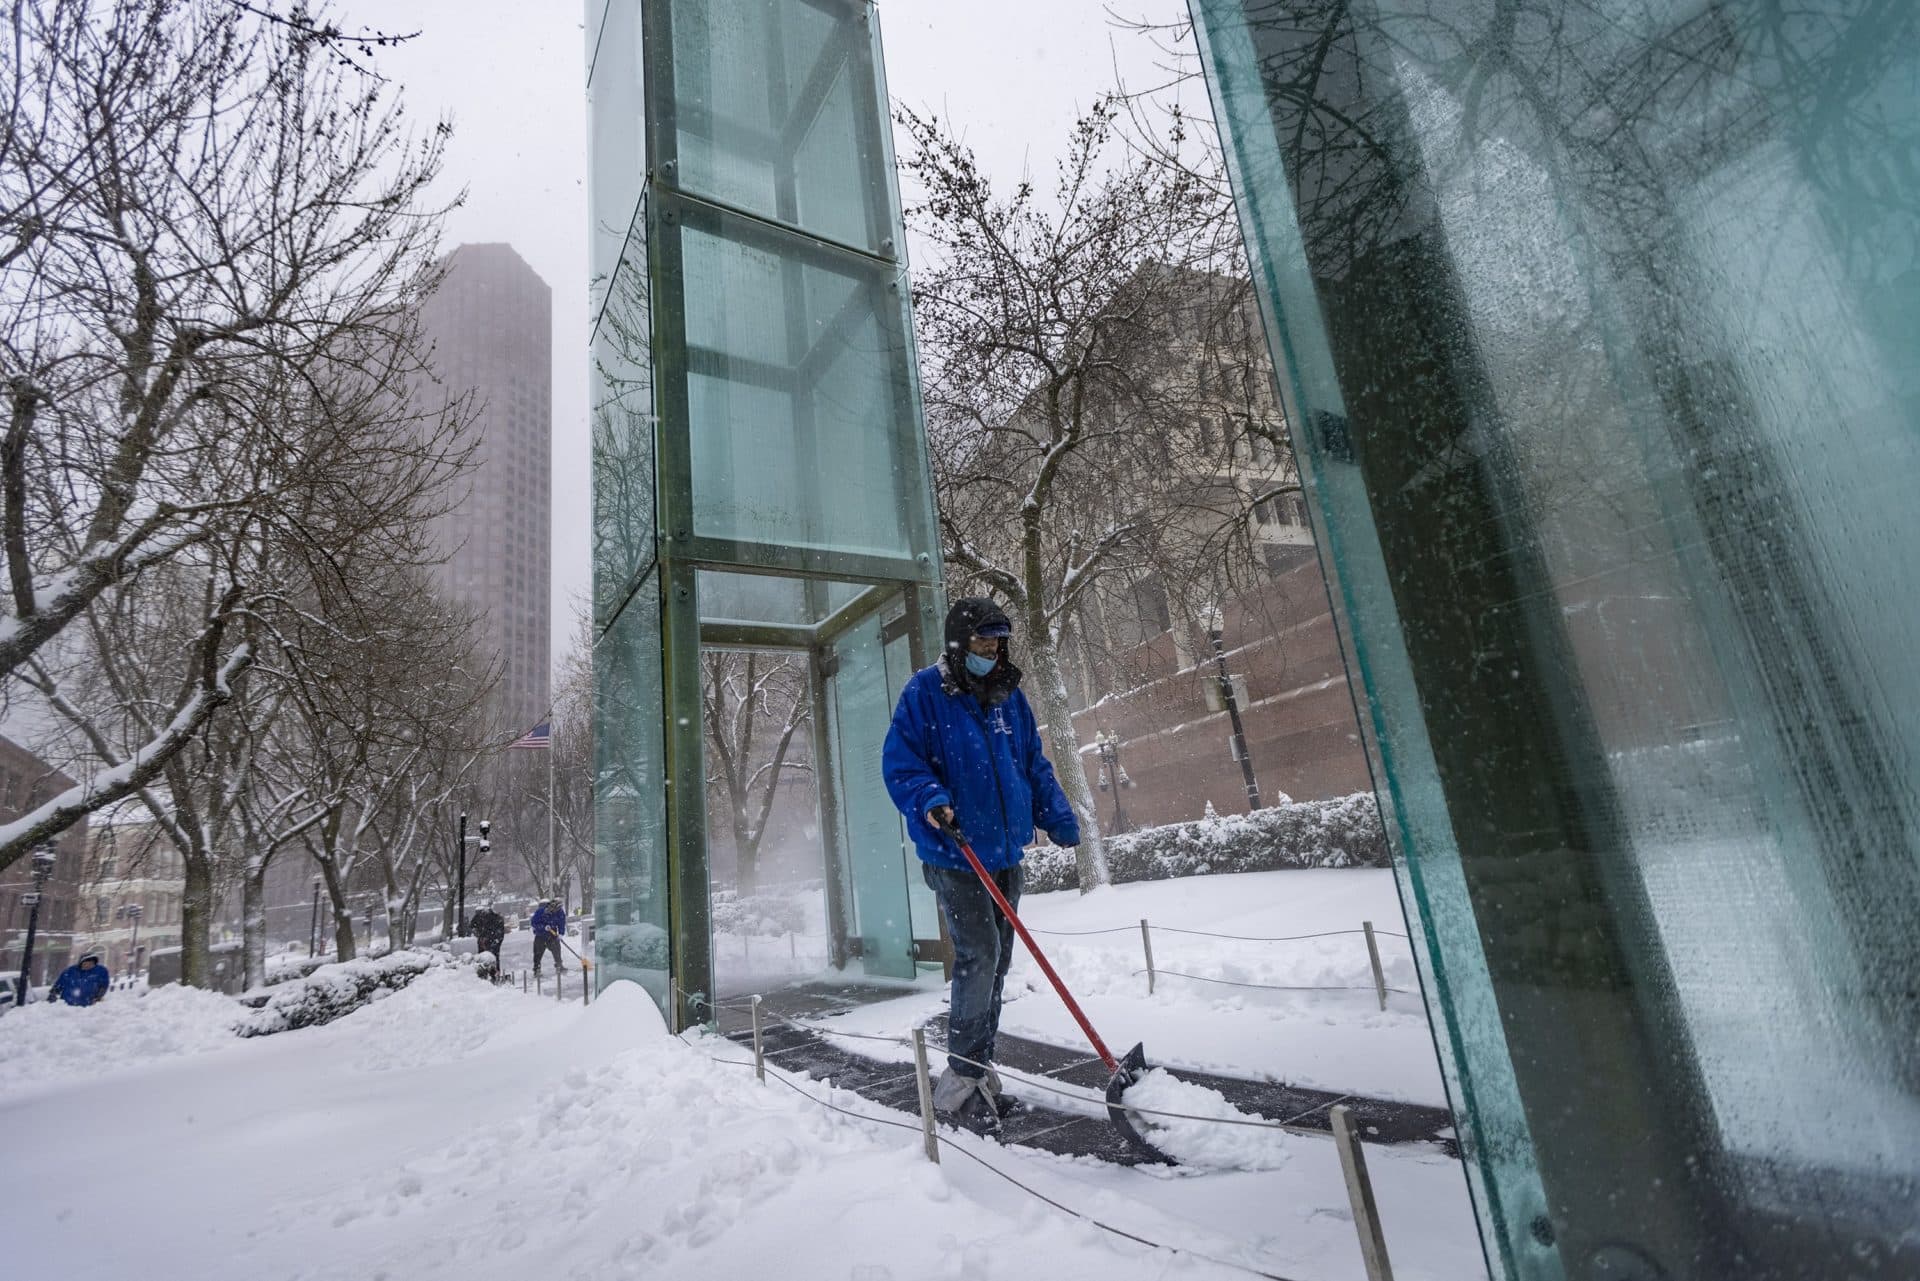 Workers clear snow from the New England Holocaust Memorial on Congress Street. (Jesse Costa/WBUR)